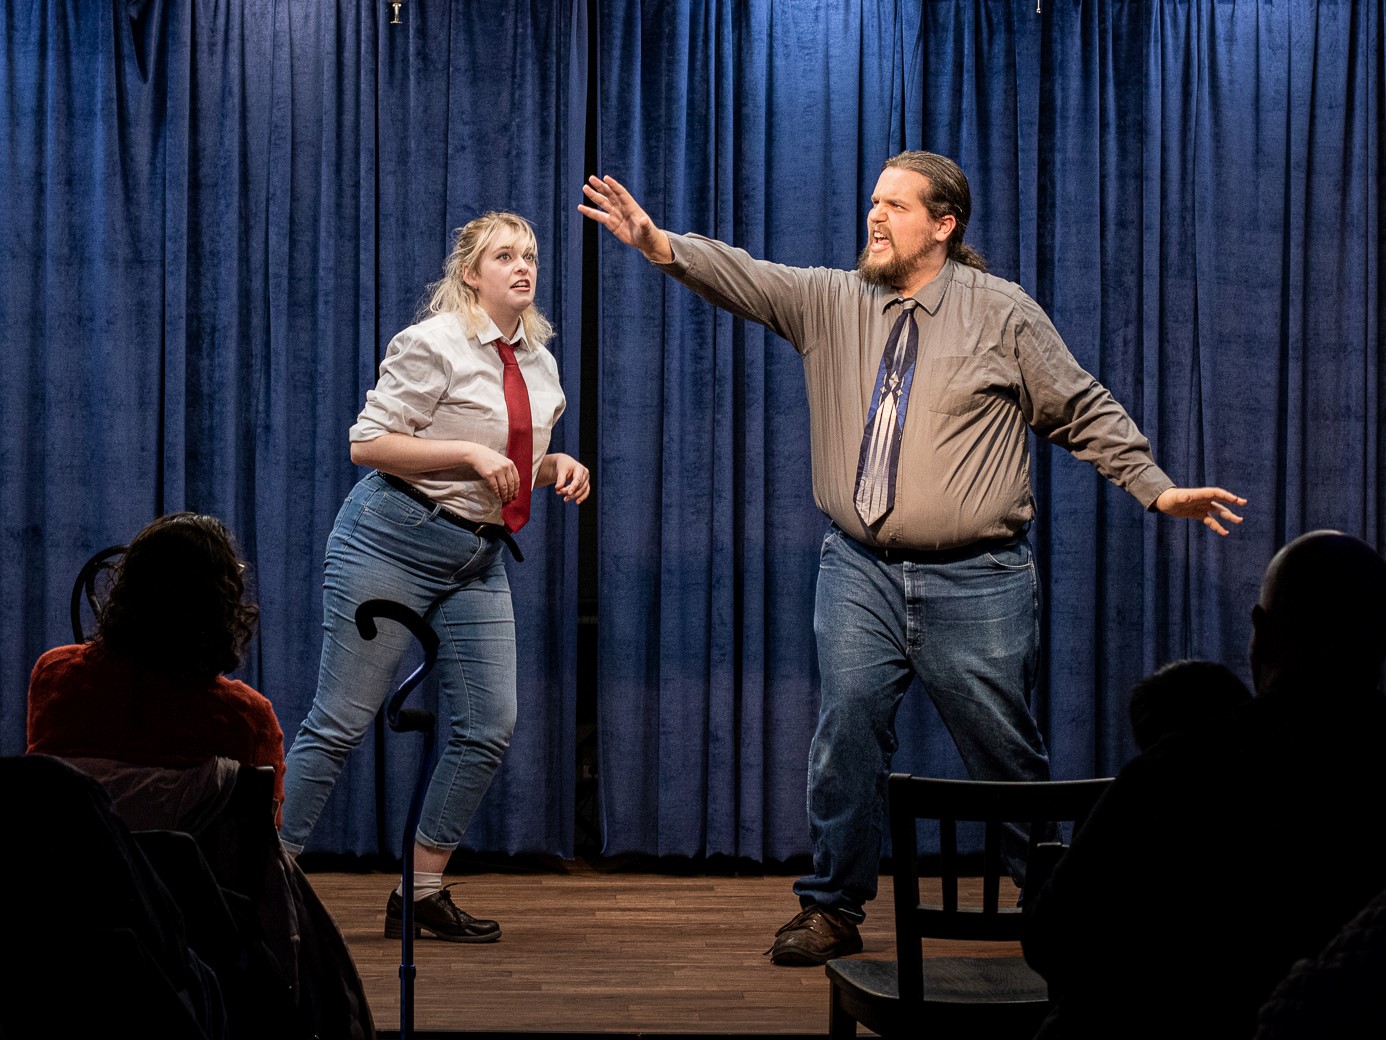 Two actors perform an improv scene on a stage